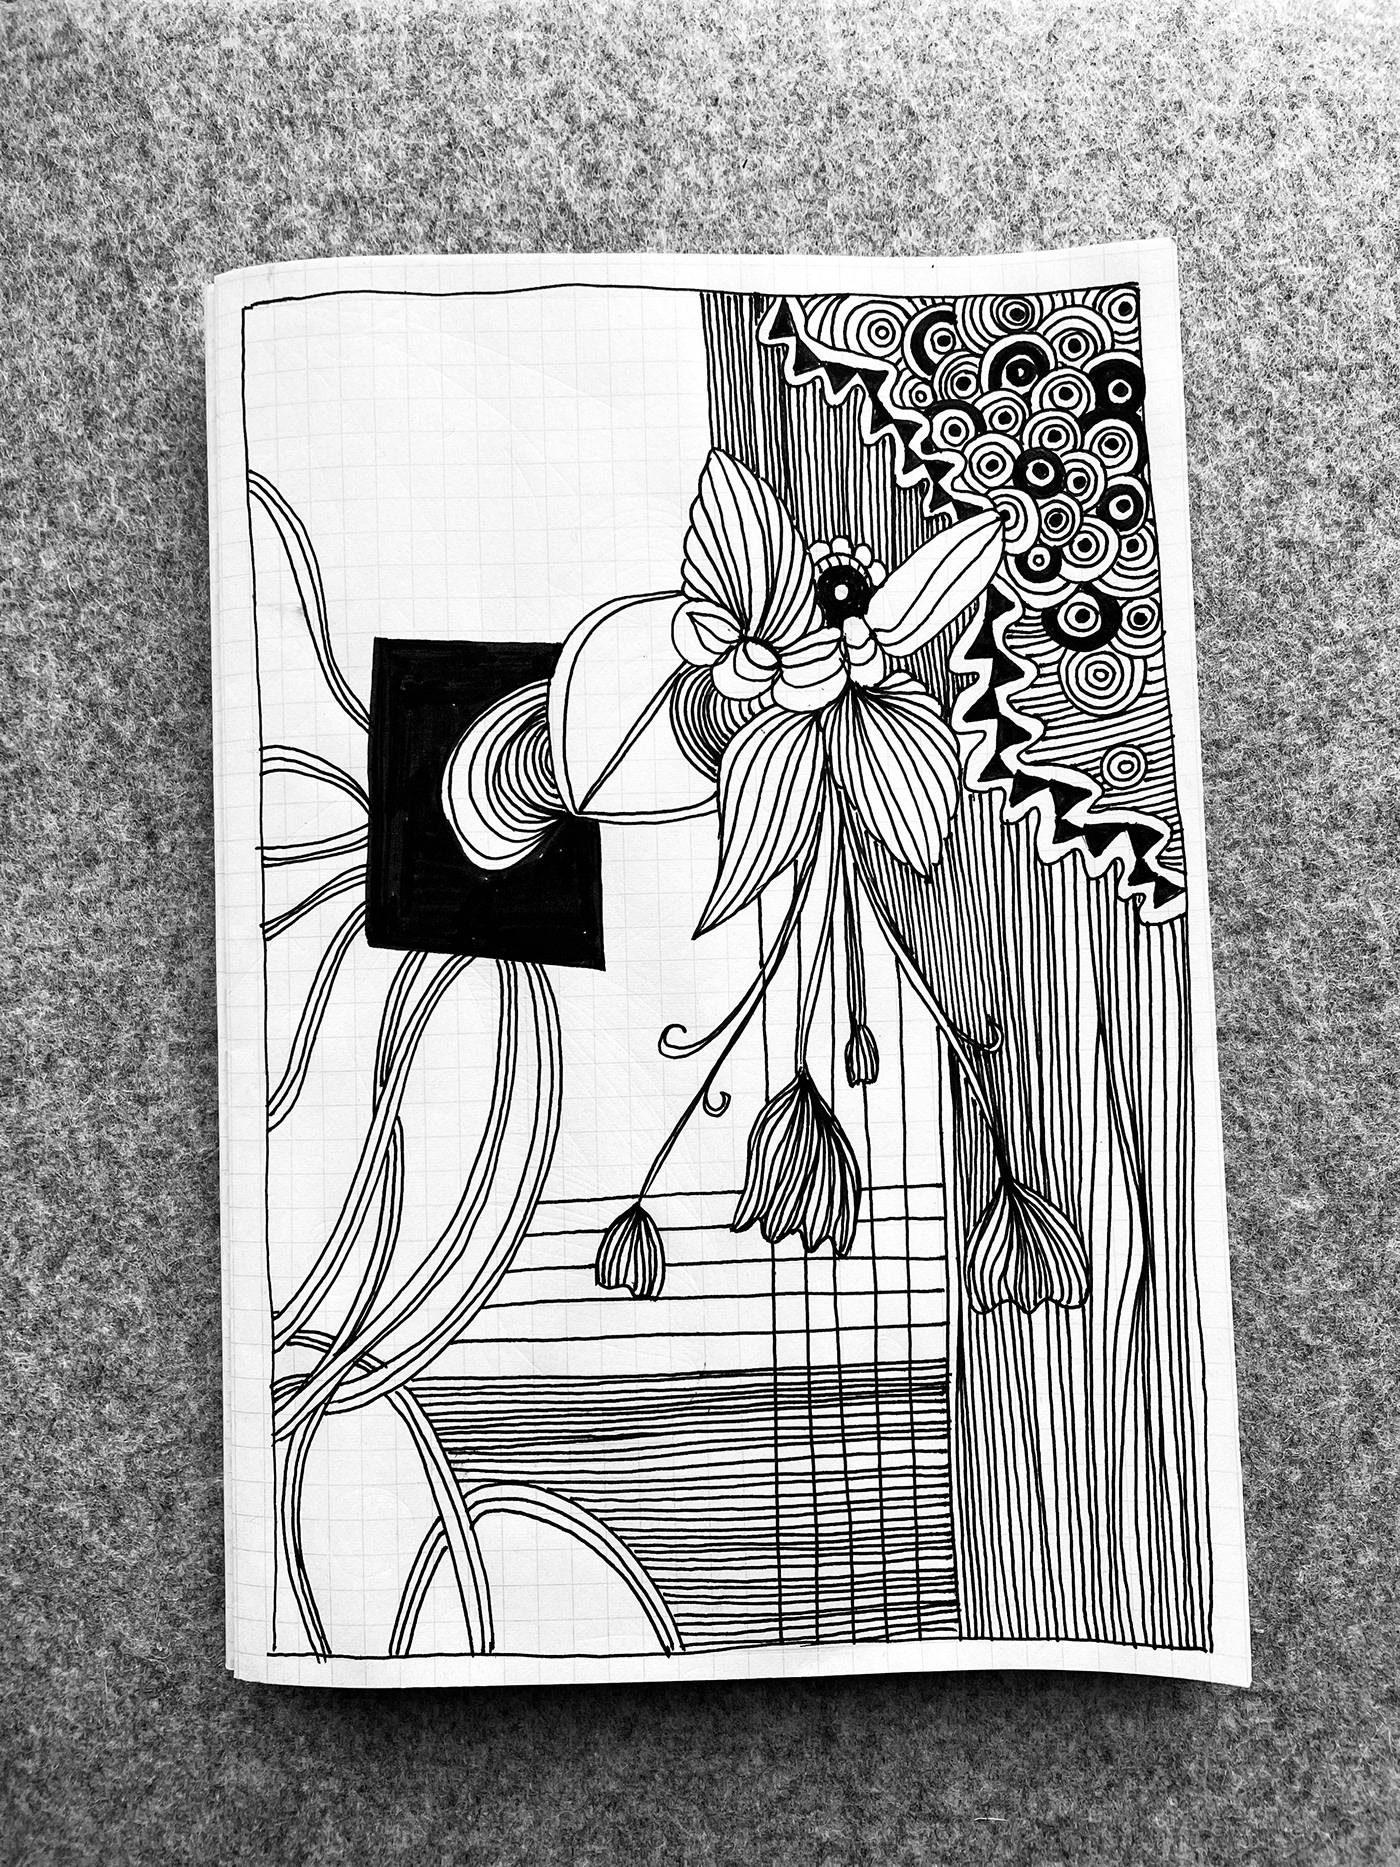 linework lineart linedrawing blackpen blackandwhite abstractart monster OnceUponaTime universe BeingHuman penandpaper   Zendoodle sketch quicksketch dailysketch handdrawings pendrawing art pieces backtopaper fatfatgetback linedoodle OUTTASPACE paperdrawing recording memories